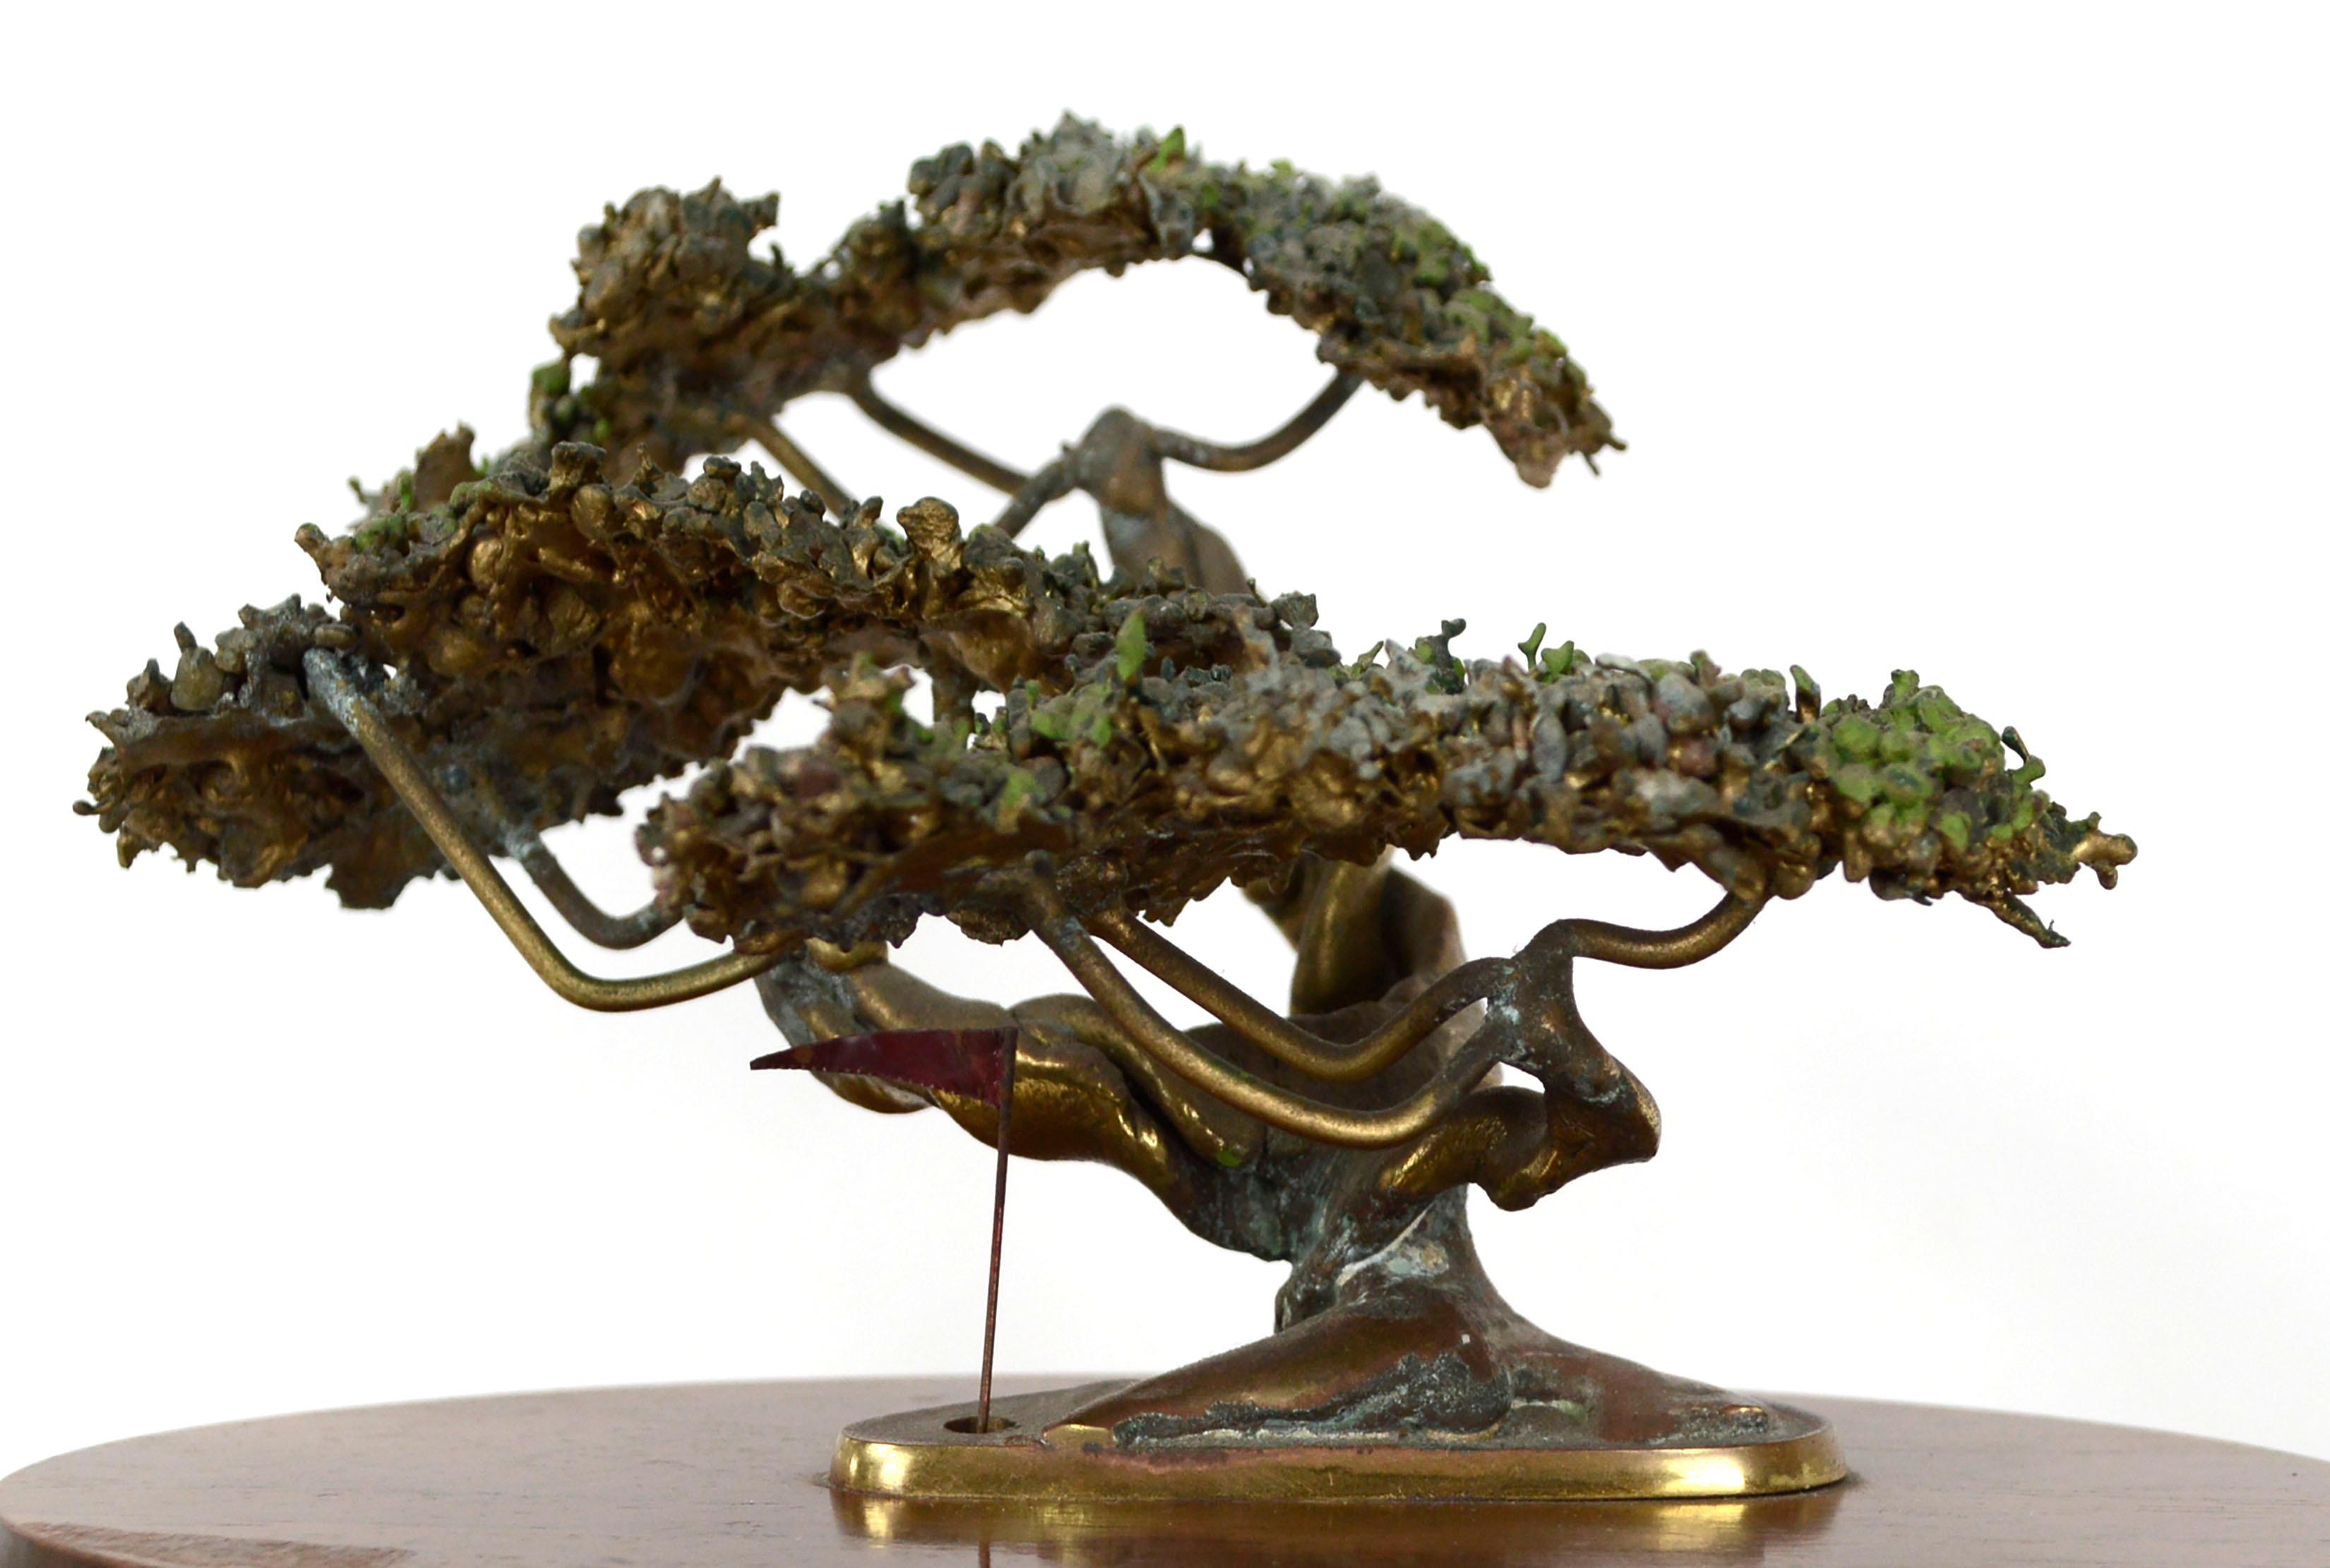 Beautiful small-scale bronze sculpture of a bonsai tree mounted on an oval wooden base by Robert Scott (American, 20th Century), with a small golf hole and red flag. The small tree is delicately detailed and its textured canopy of leaves is created